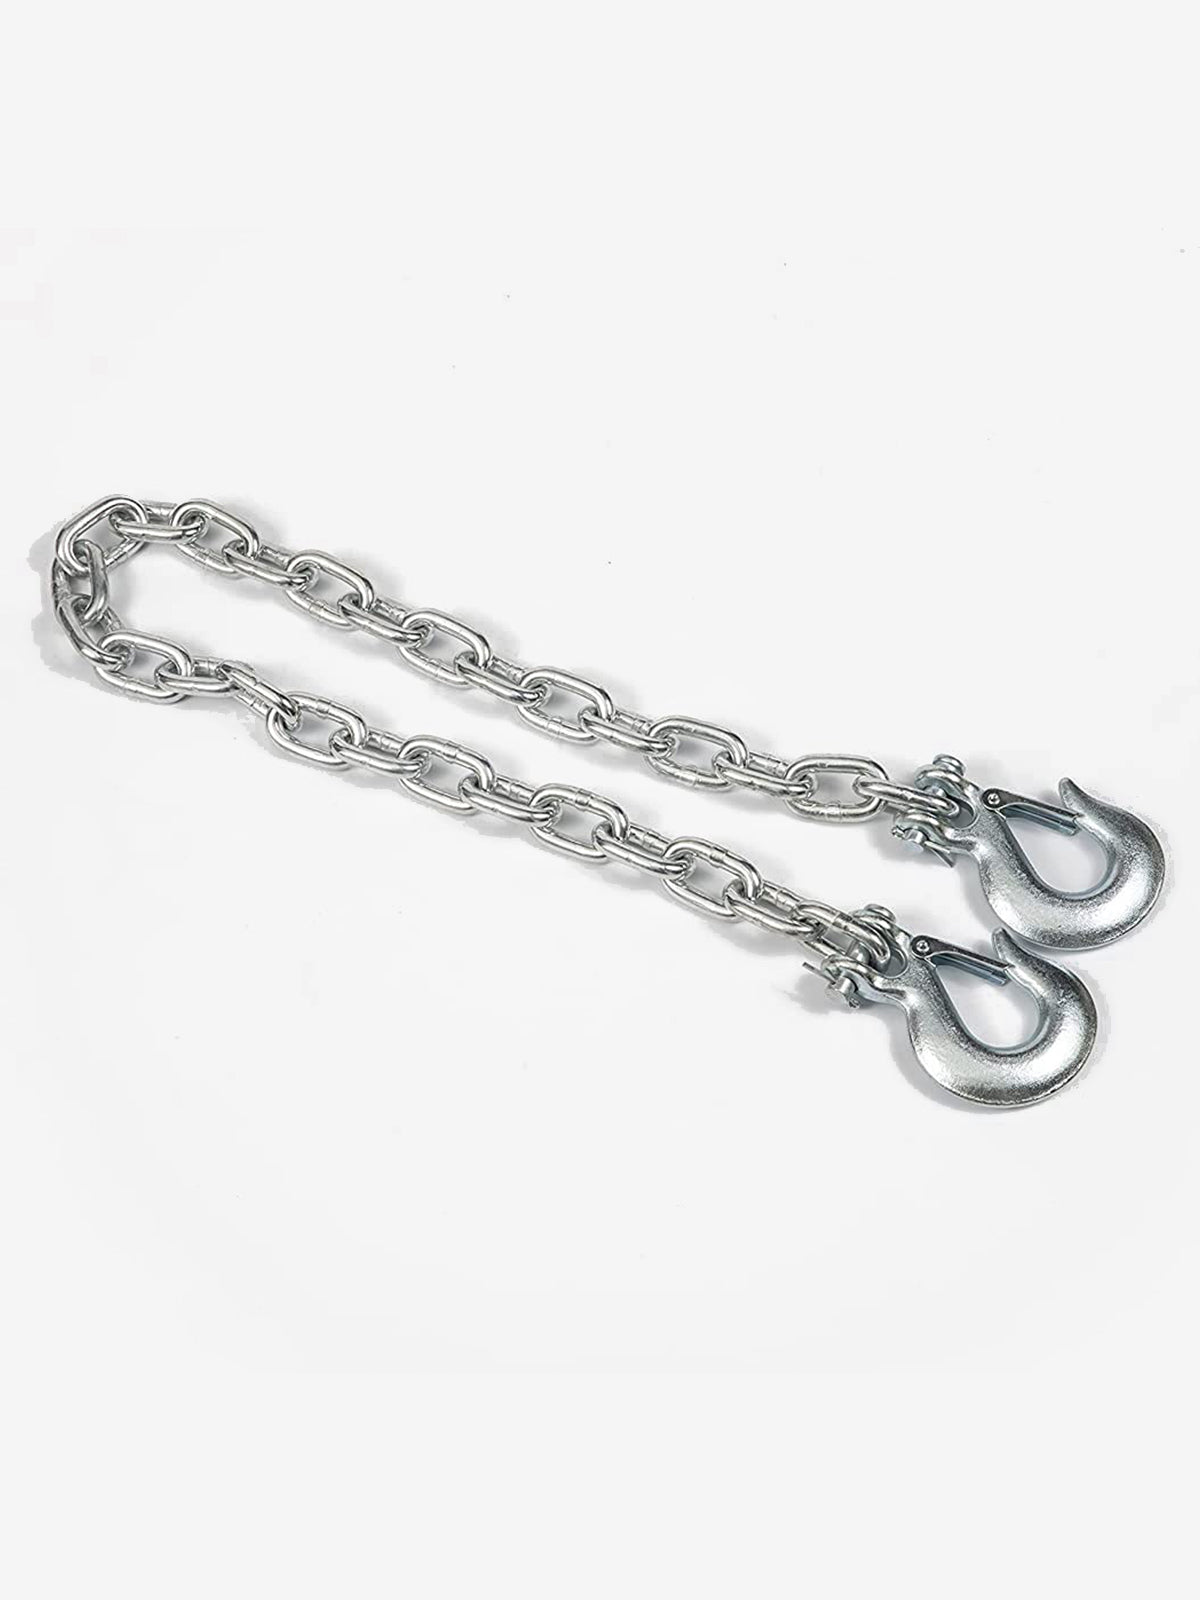 Safety Chain with Clevis Style Slip Hook (G43 3/8"*35" - 2 per Box)